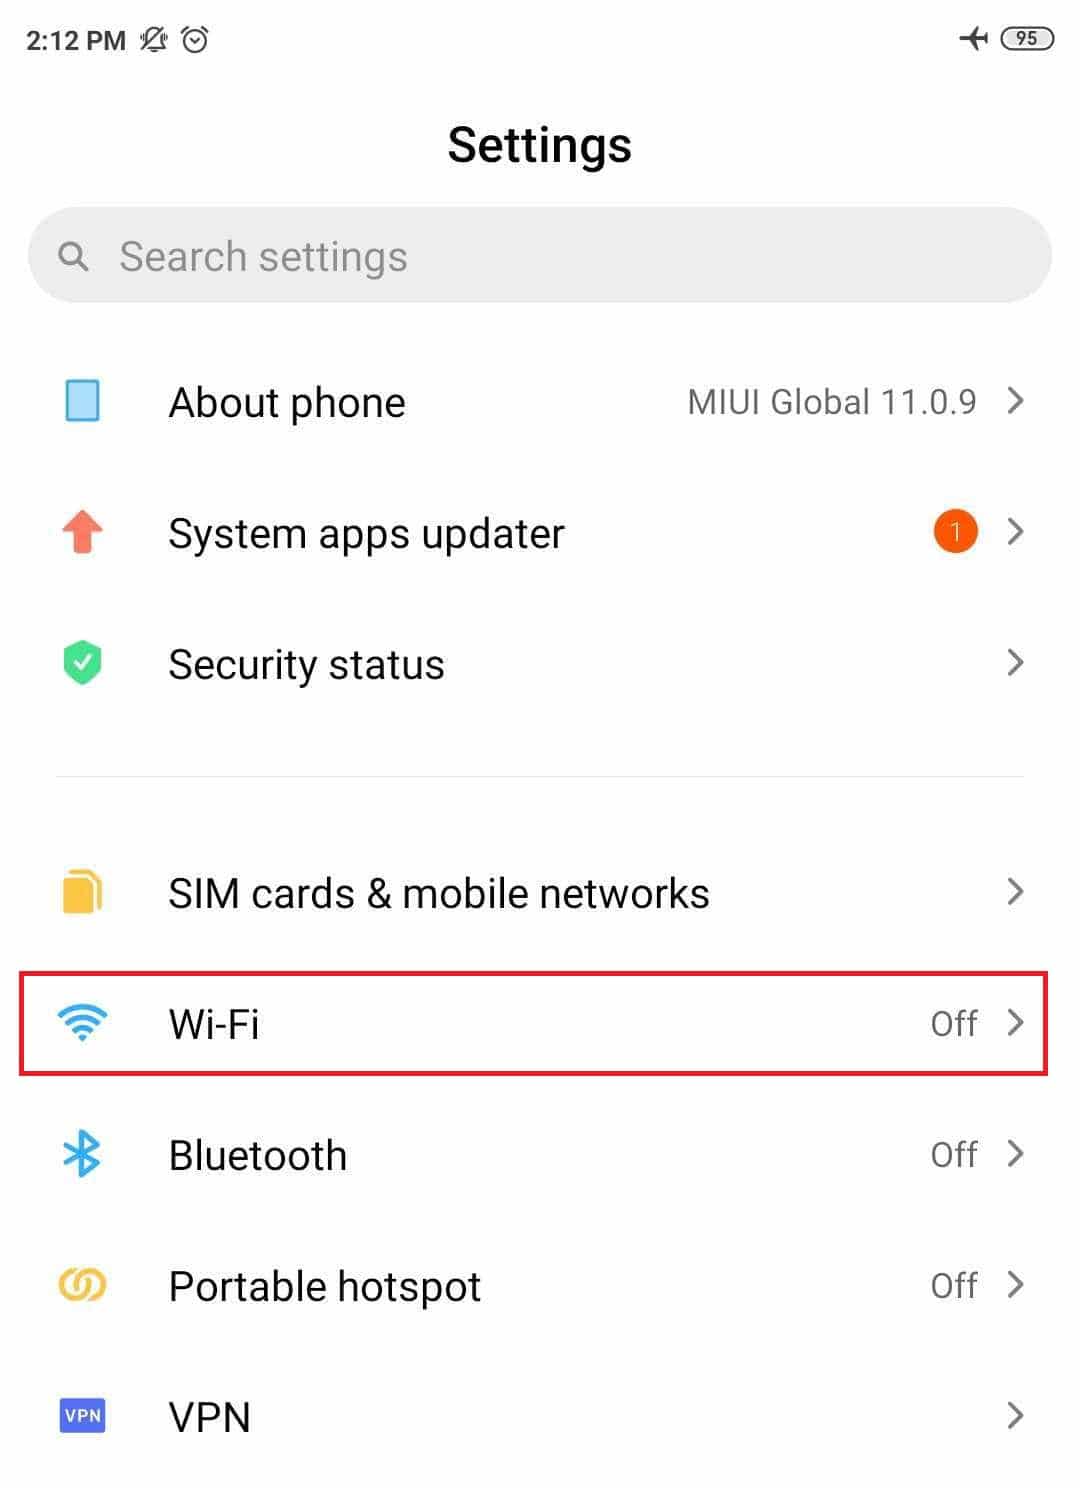 Go to Settings then Open Wi-Fi